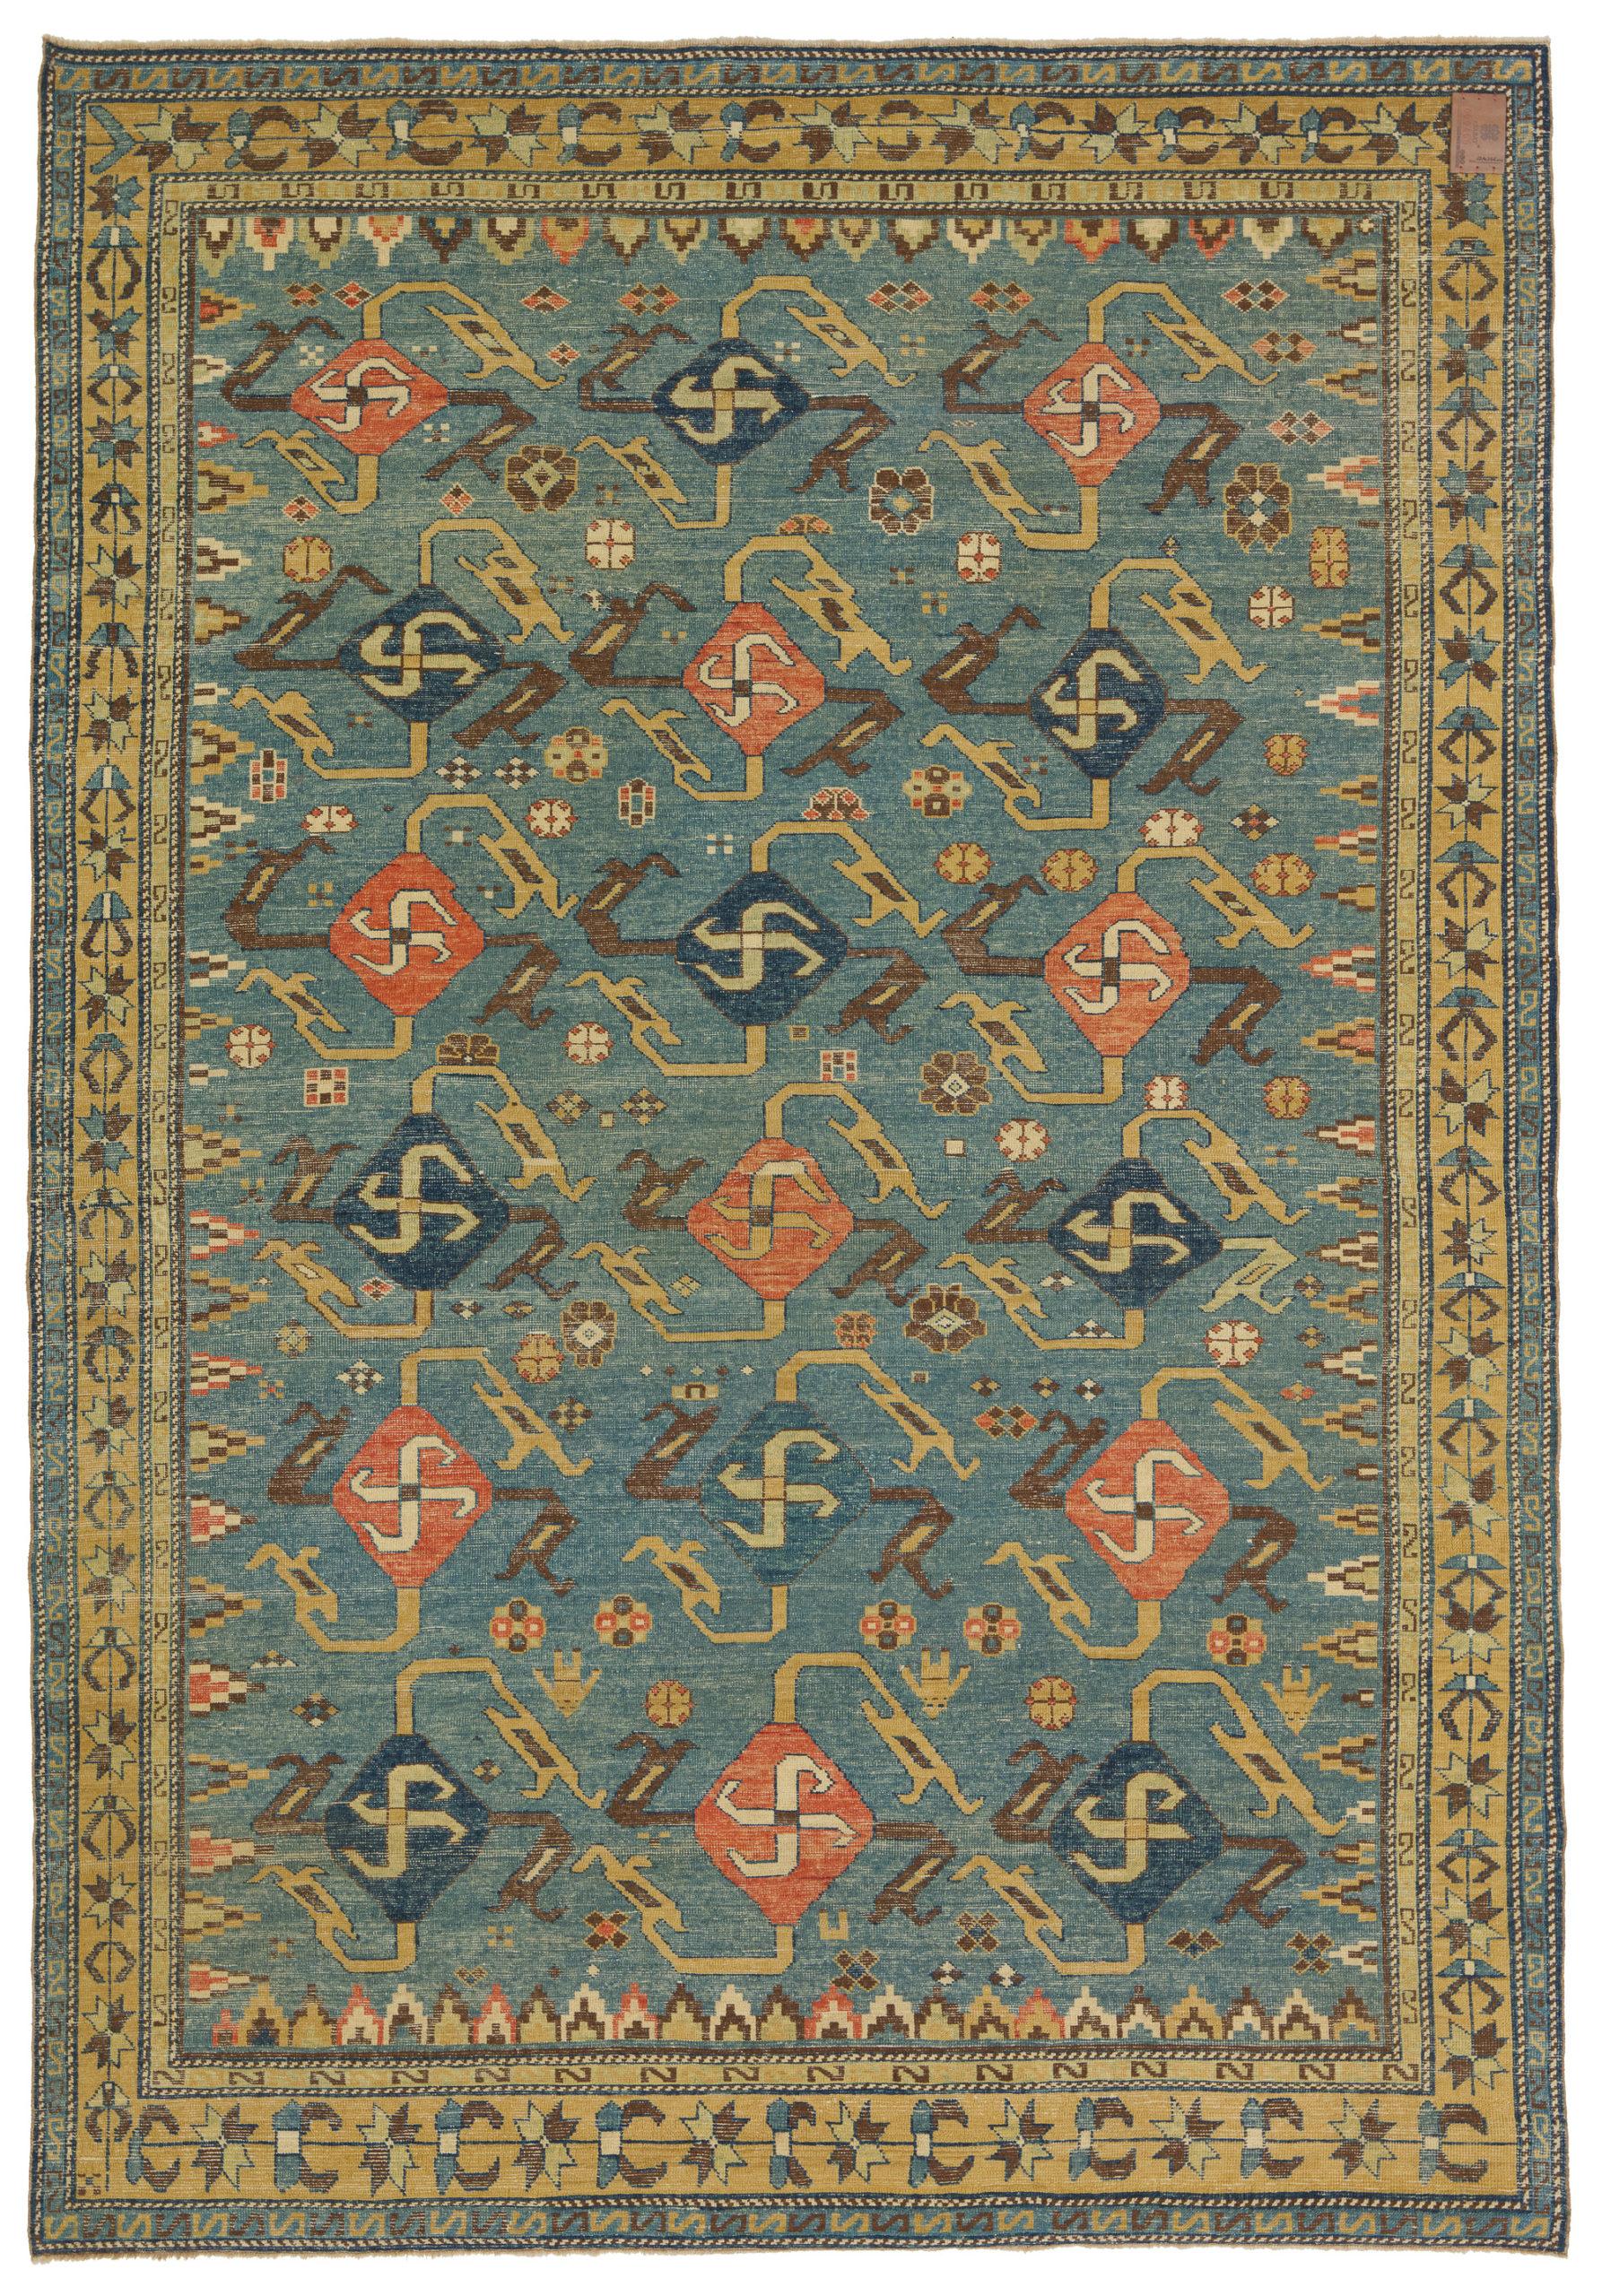 The source of rug comes from the book Orient Star – A Carpet Collection, E. Heinrich Kirchheim, Hali Publications Ltd, 1993 nr.17. This is a remarkable and very unusual swastika designed early 19th-century rug from the Central Caucasia area. This